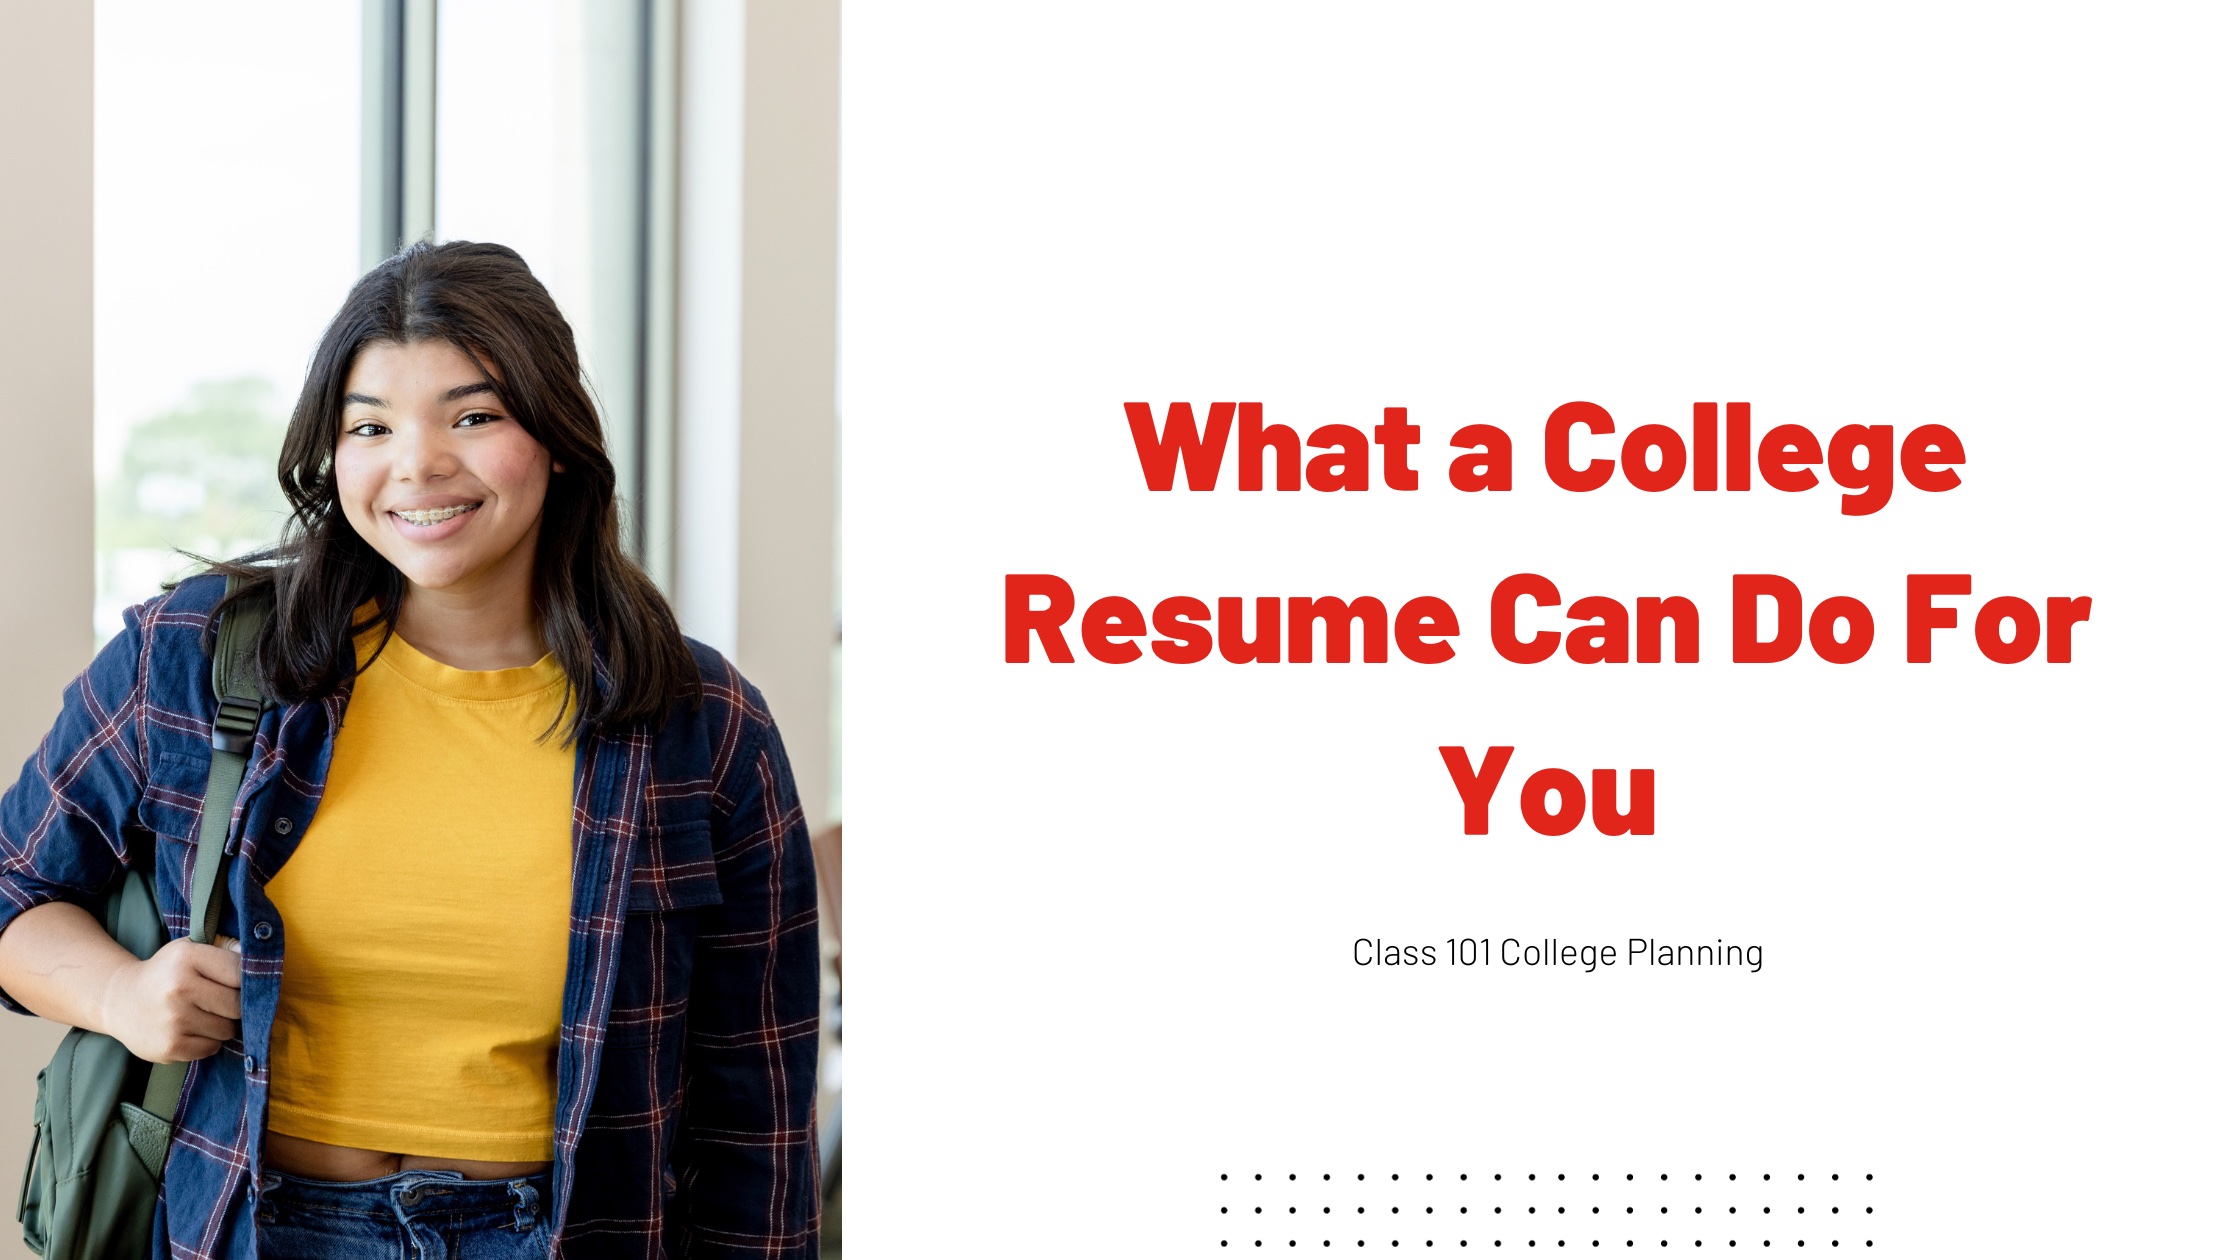 https://www.class101.com/wp-content/uploads/2023/09/what-a-college-resume-can-do-for-you-Blog-Banner.jpg